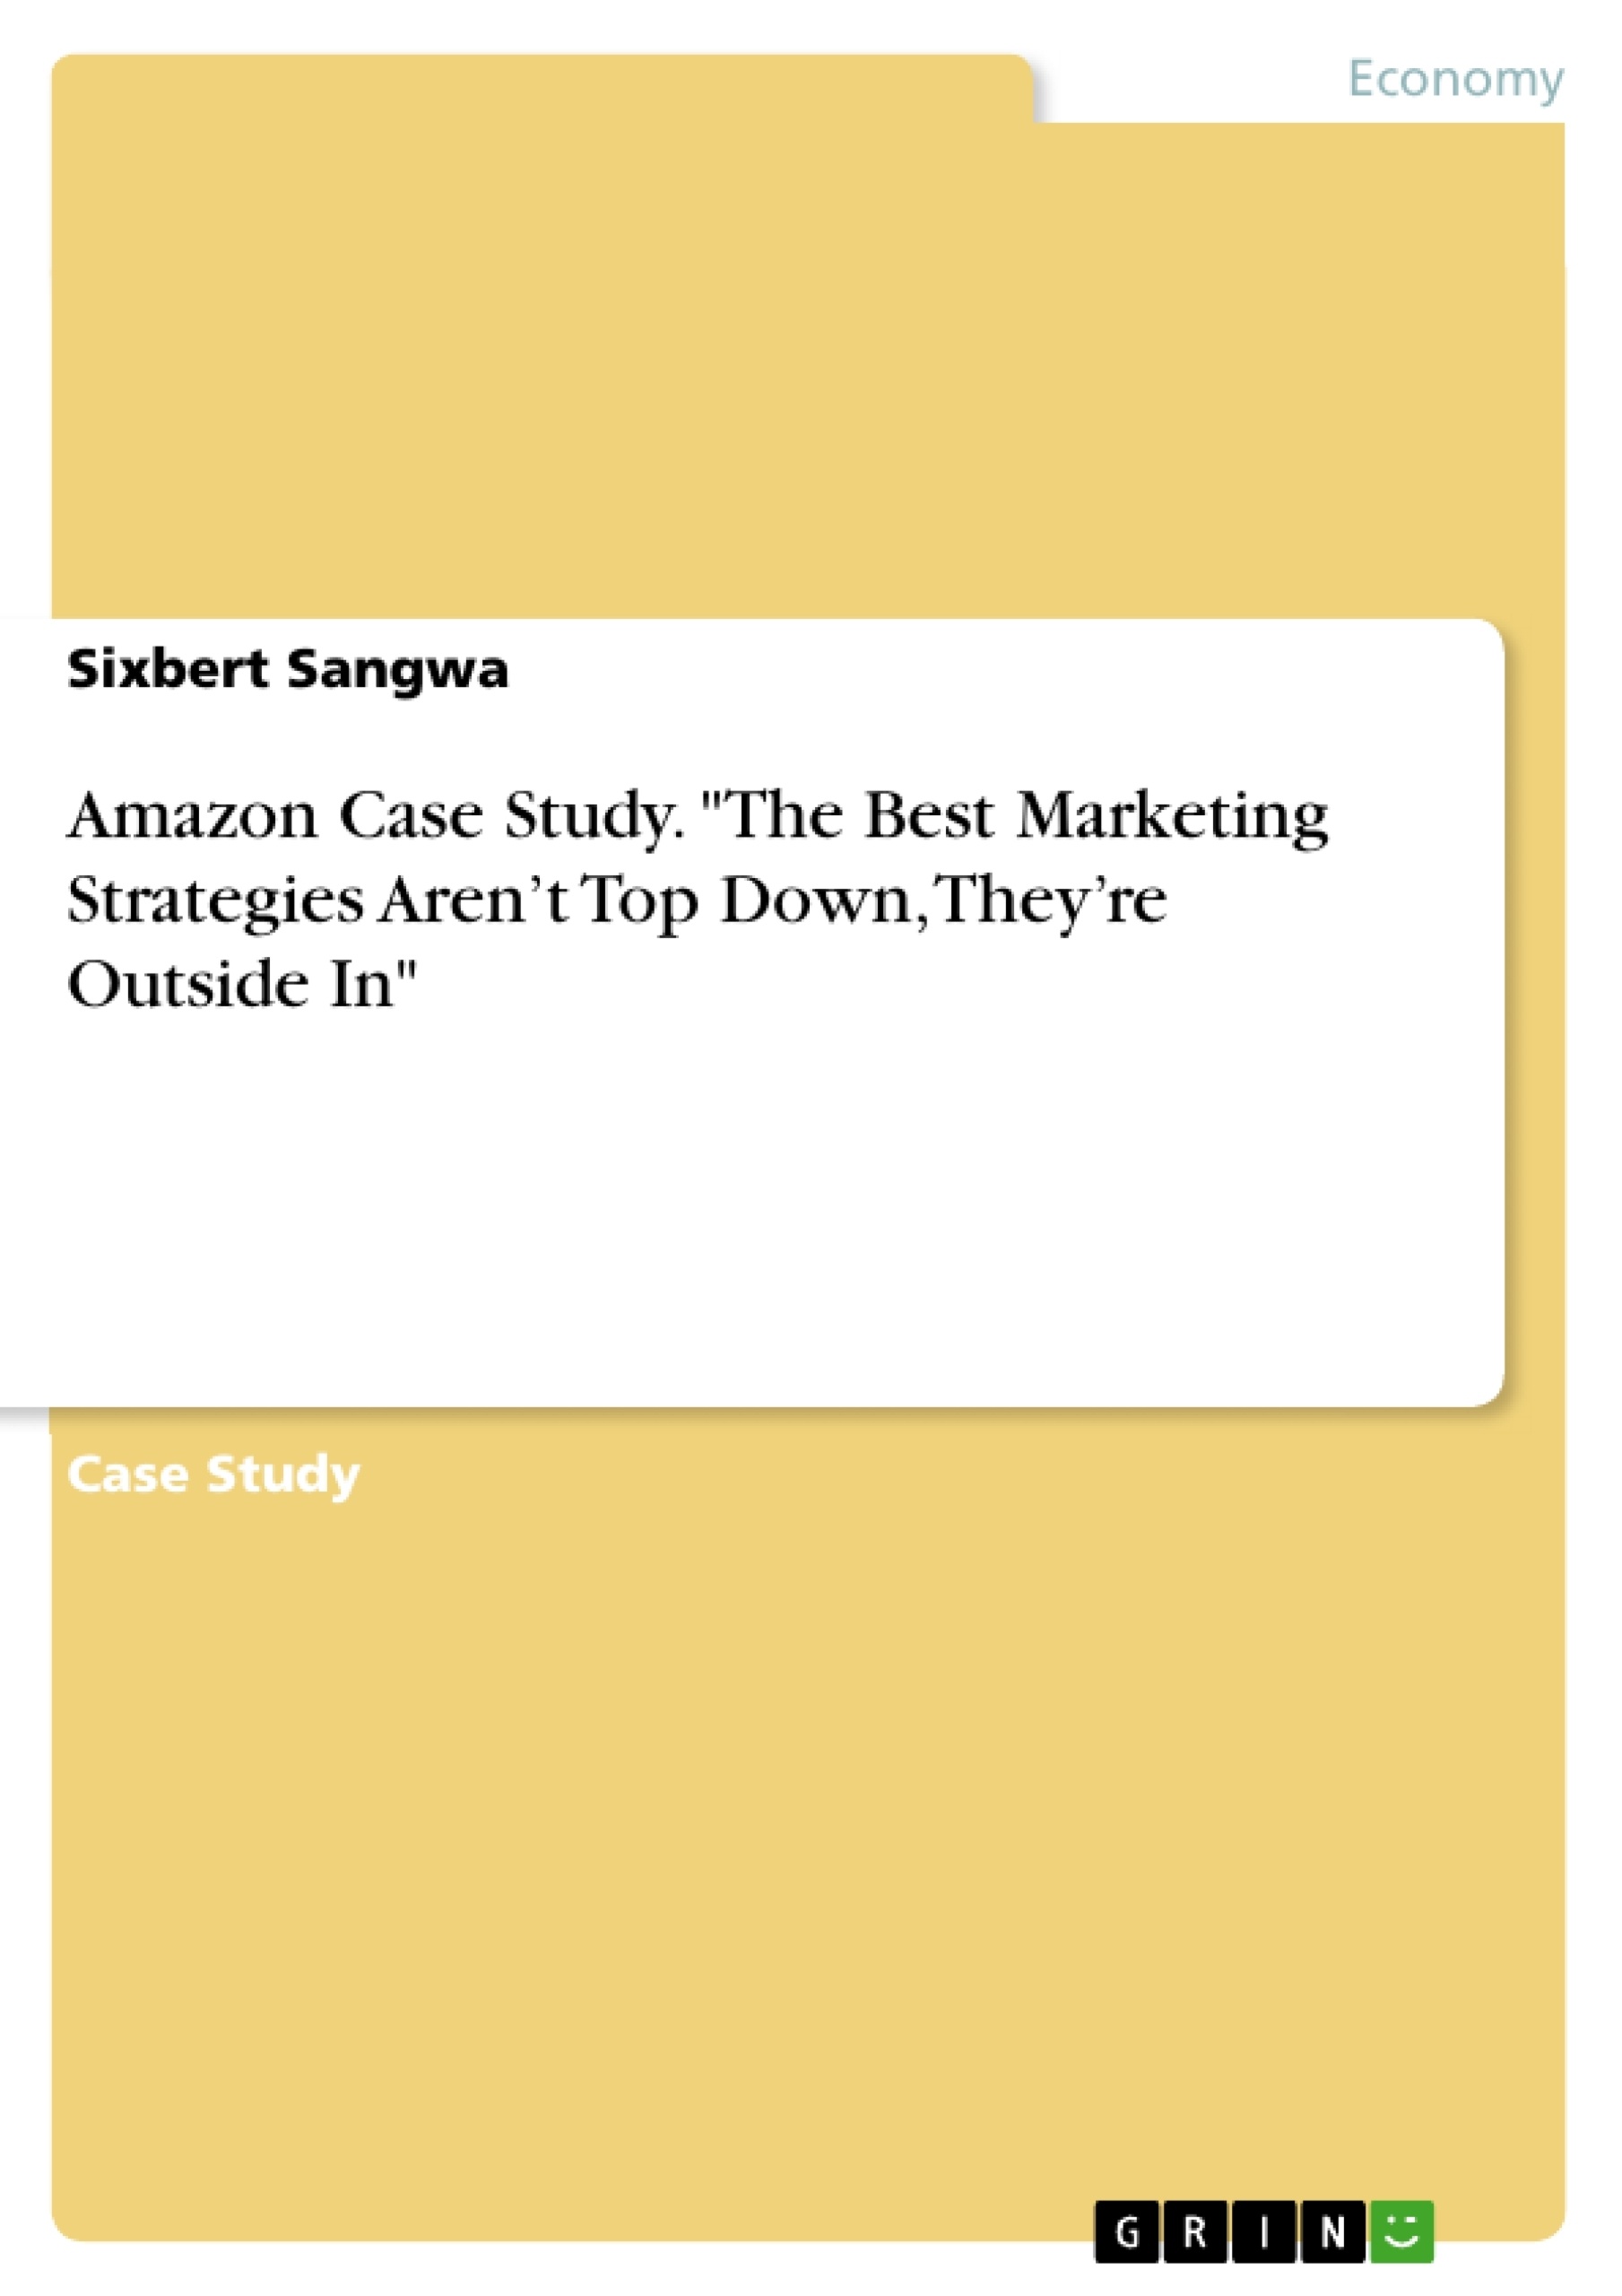 Title: Amazon Case Study. "The Best Marketing Strategies Aren’t Top Down, They’re Outside In"